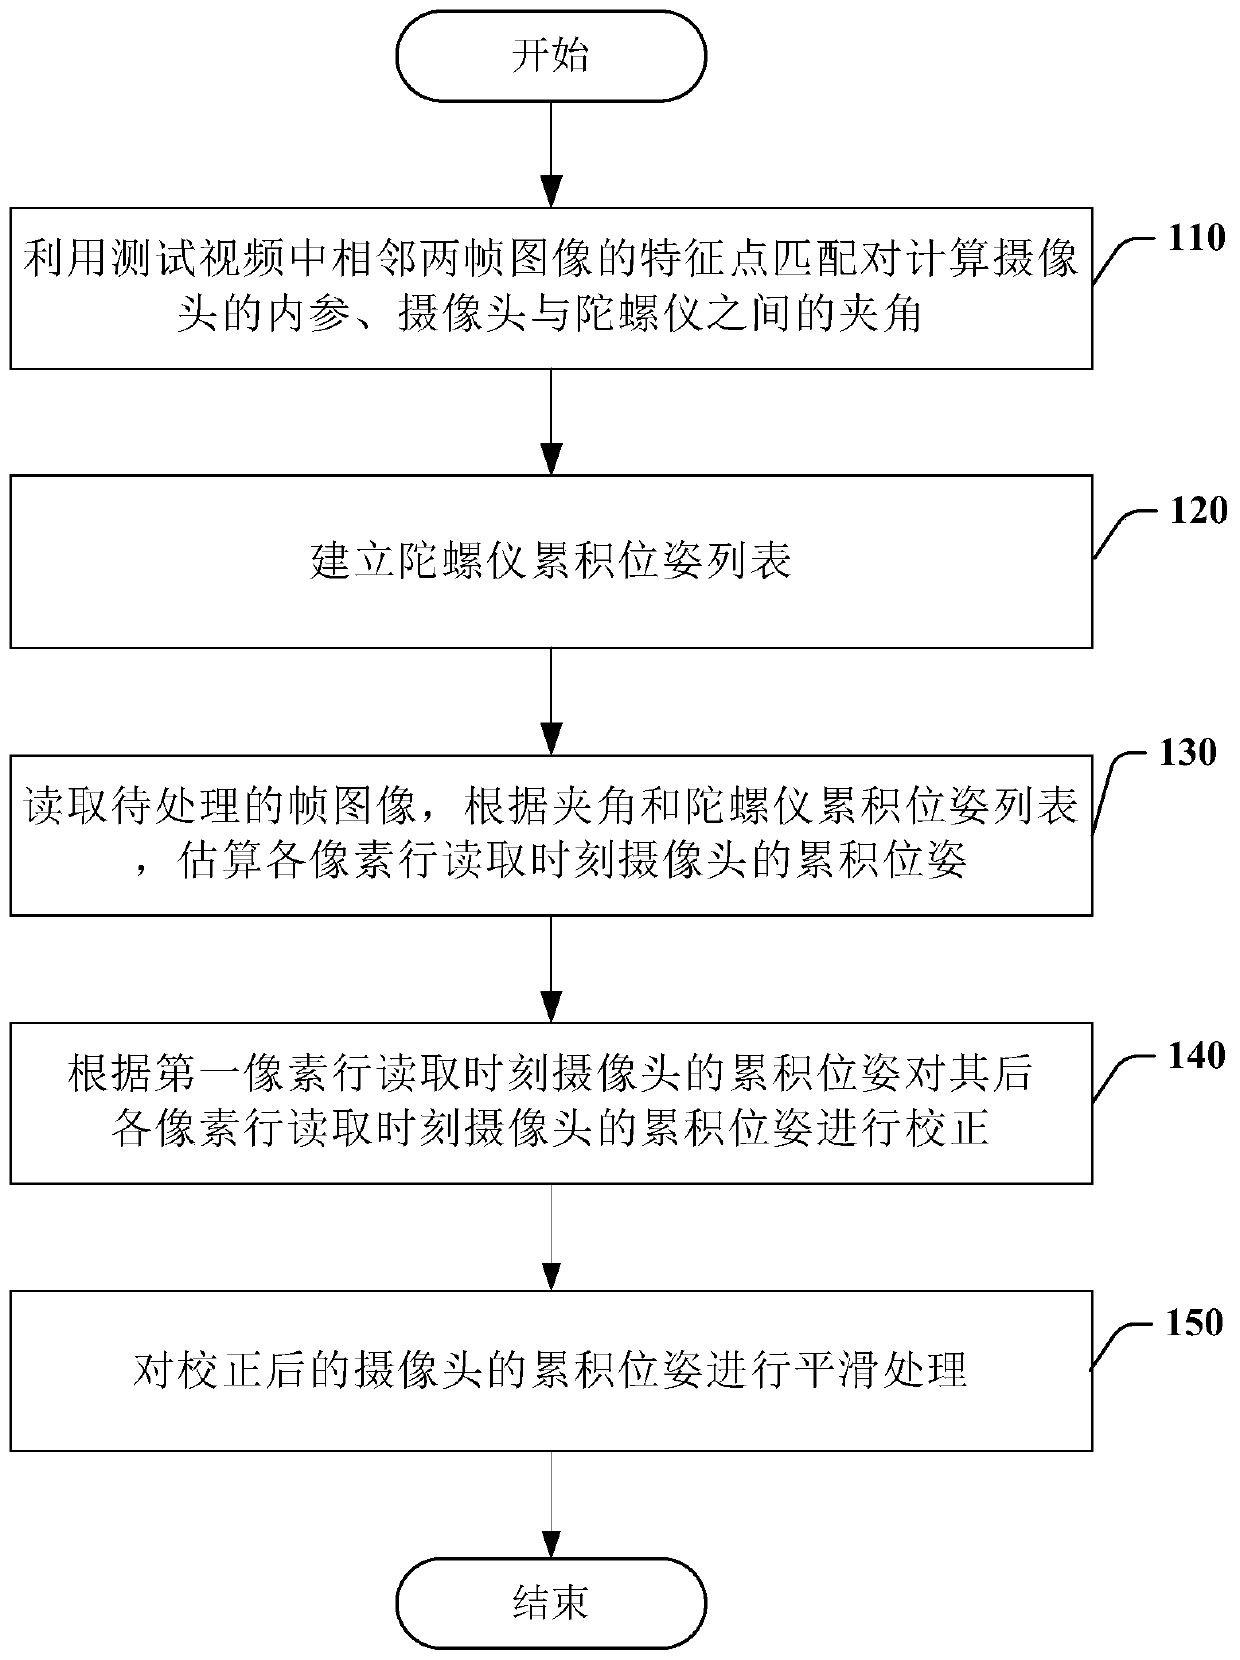 Video image stabilization method and device